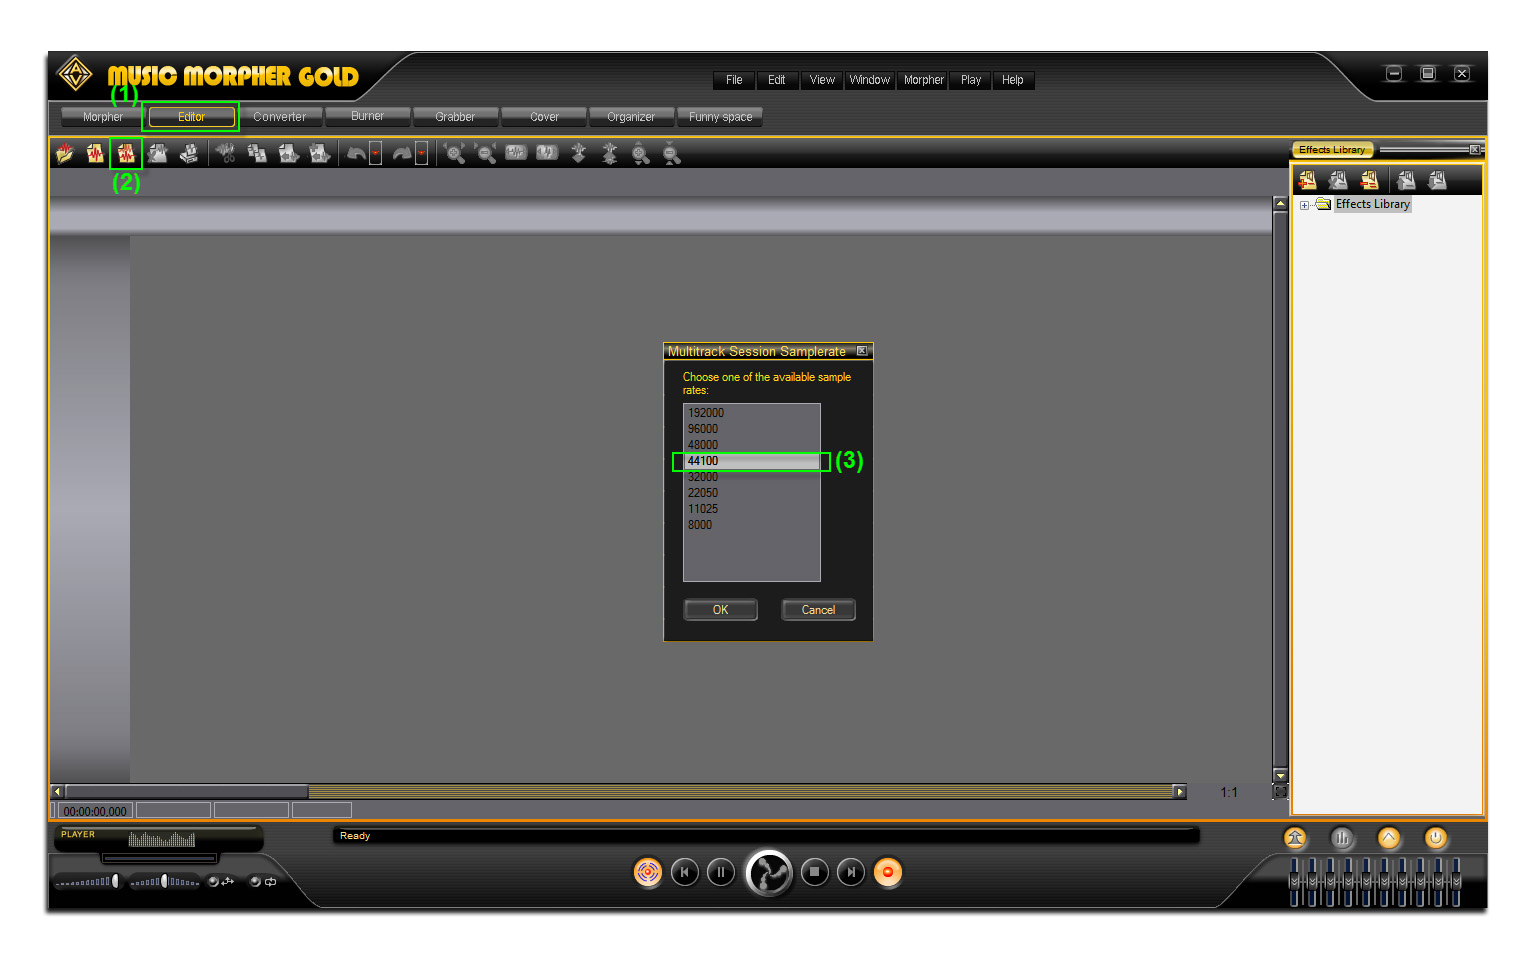 Fig 01: MMG - Editor tab - Open New Multitrack Session